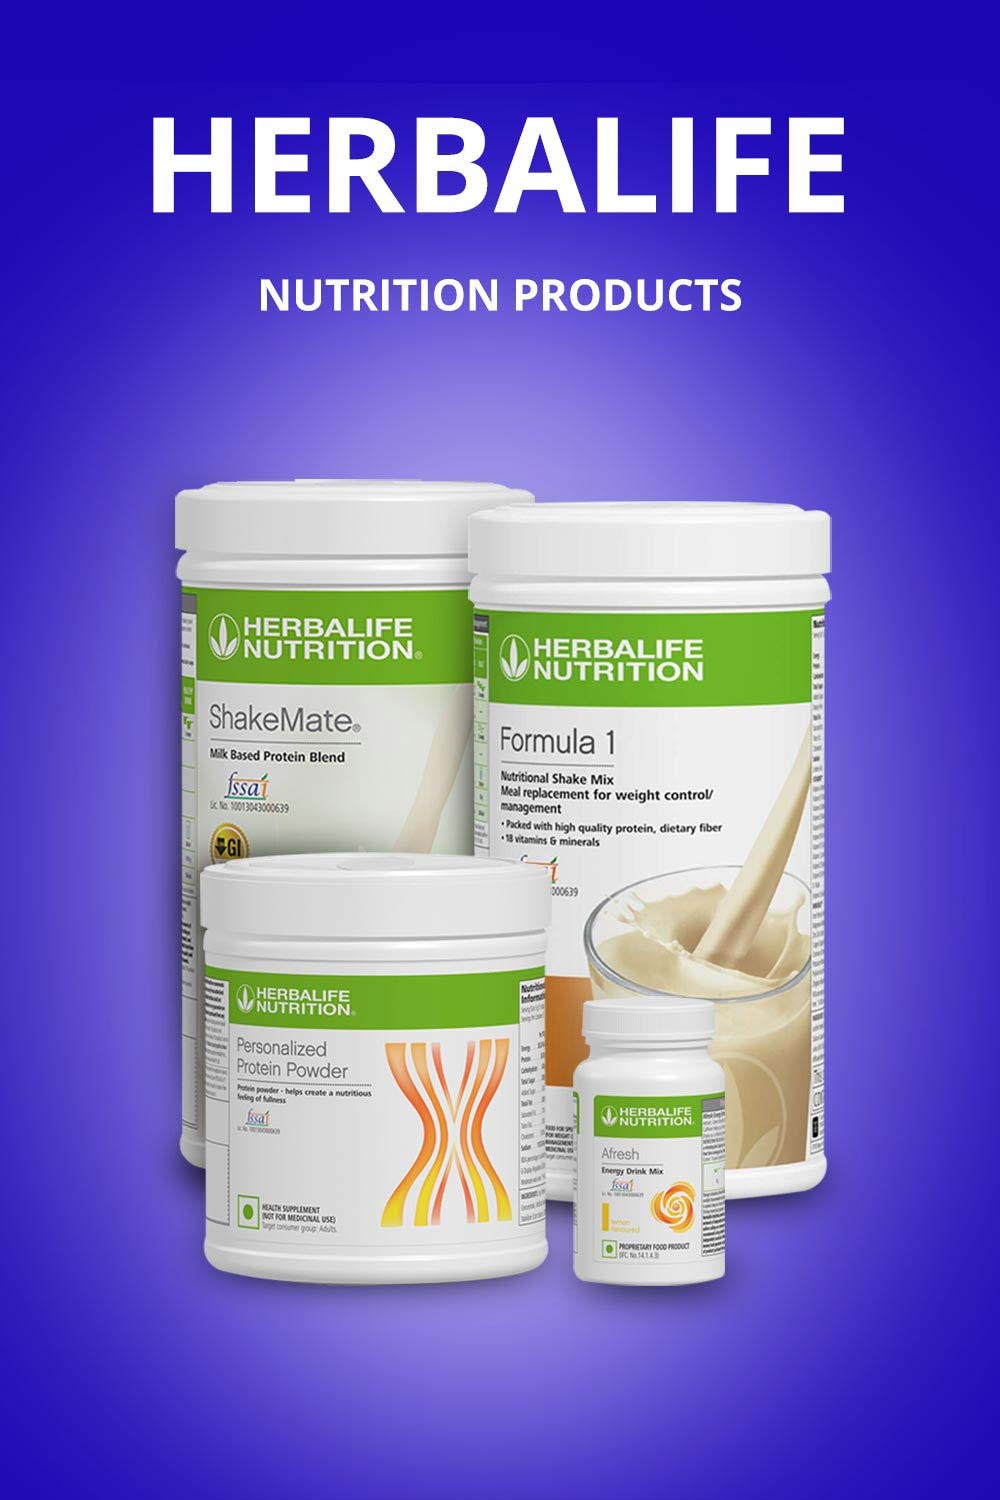 Herbalife nutrition products near Saket, by Weight loss and gain at home